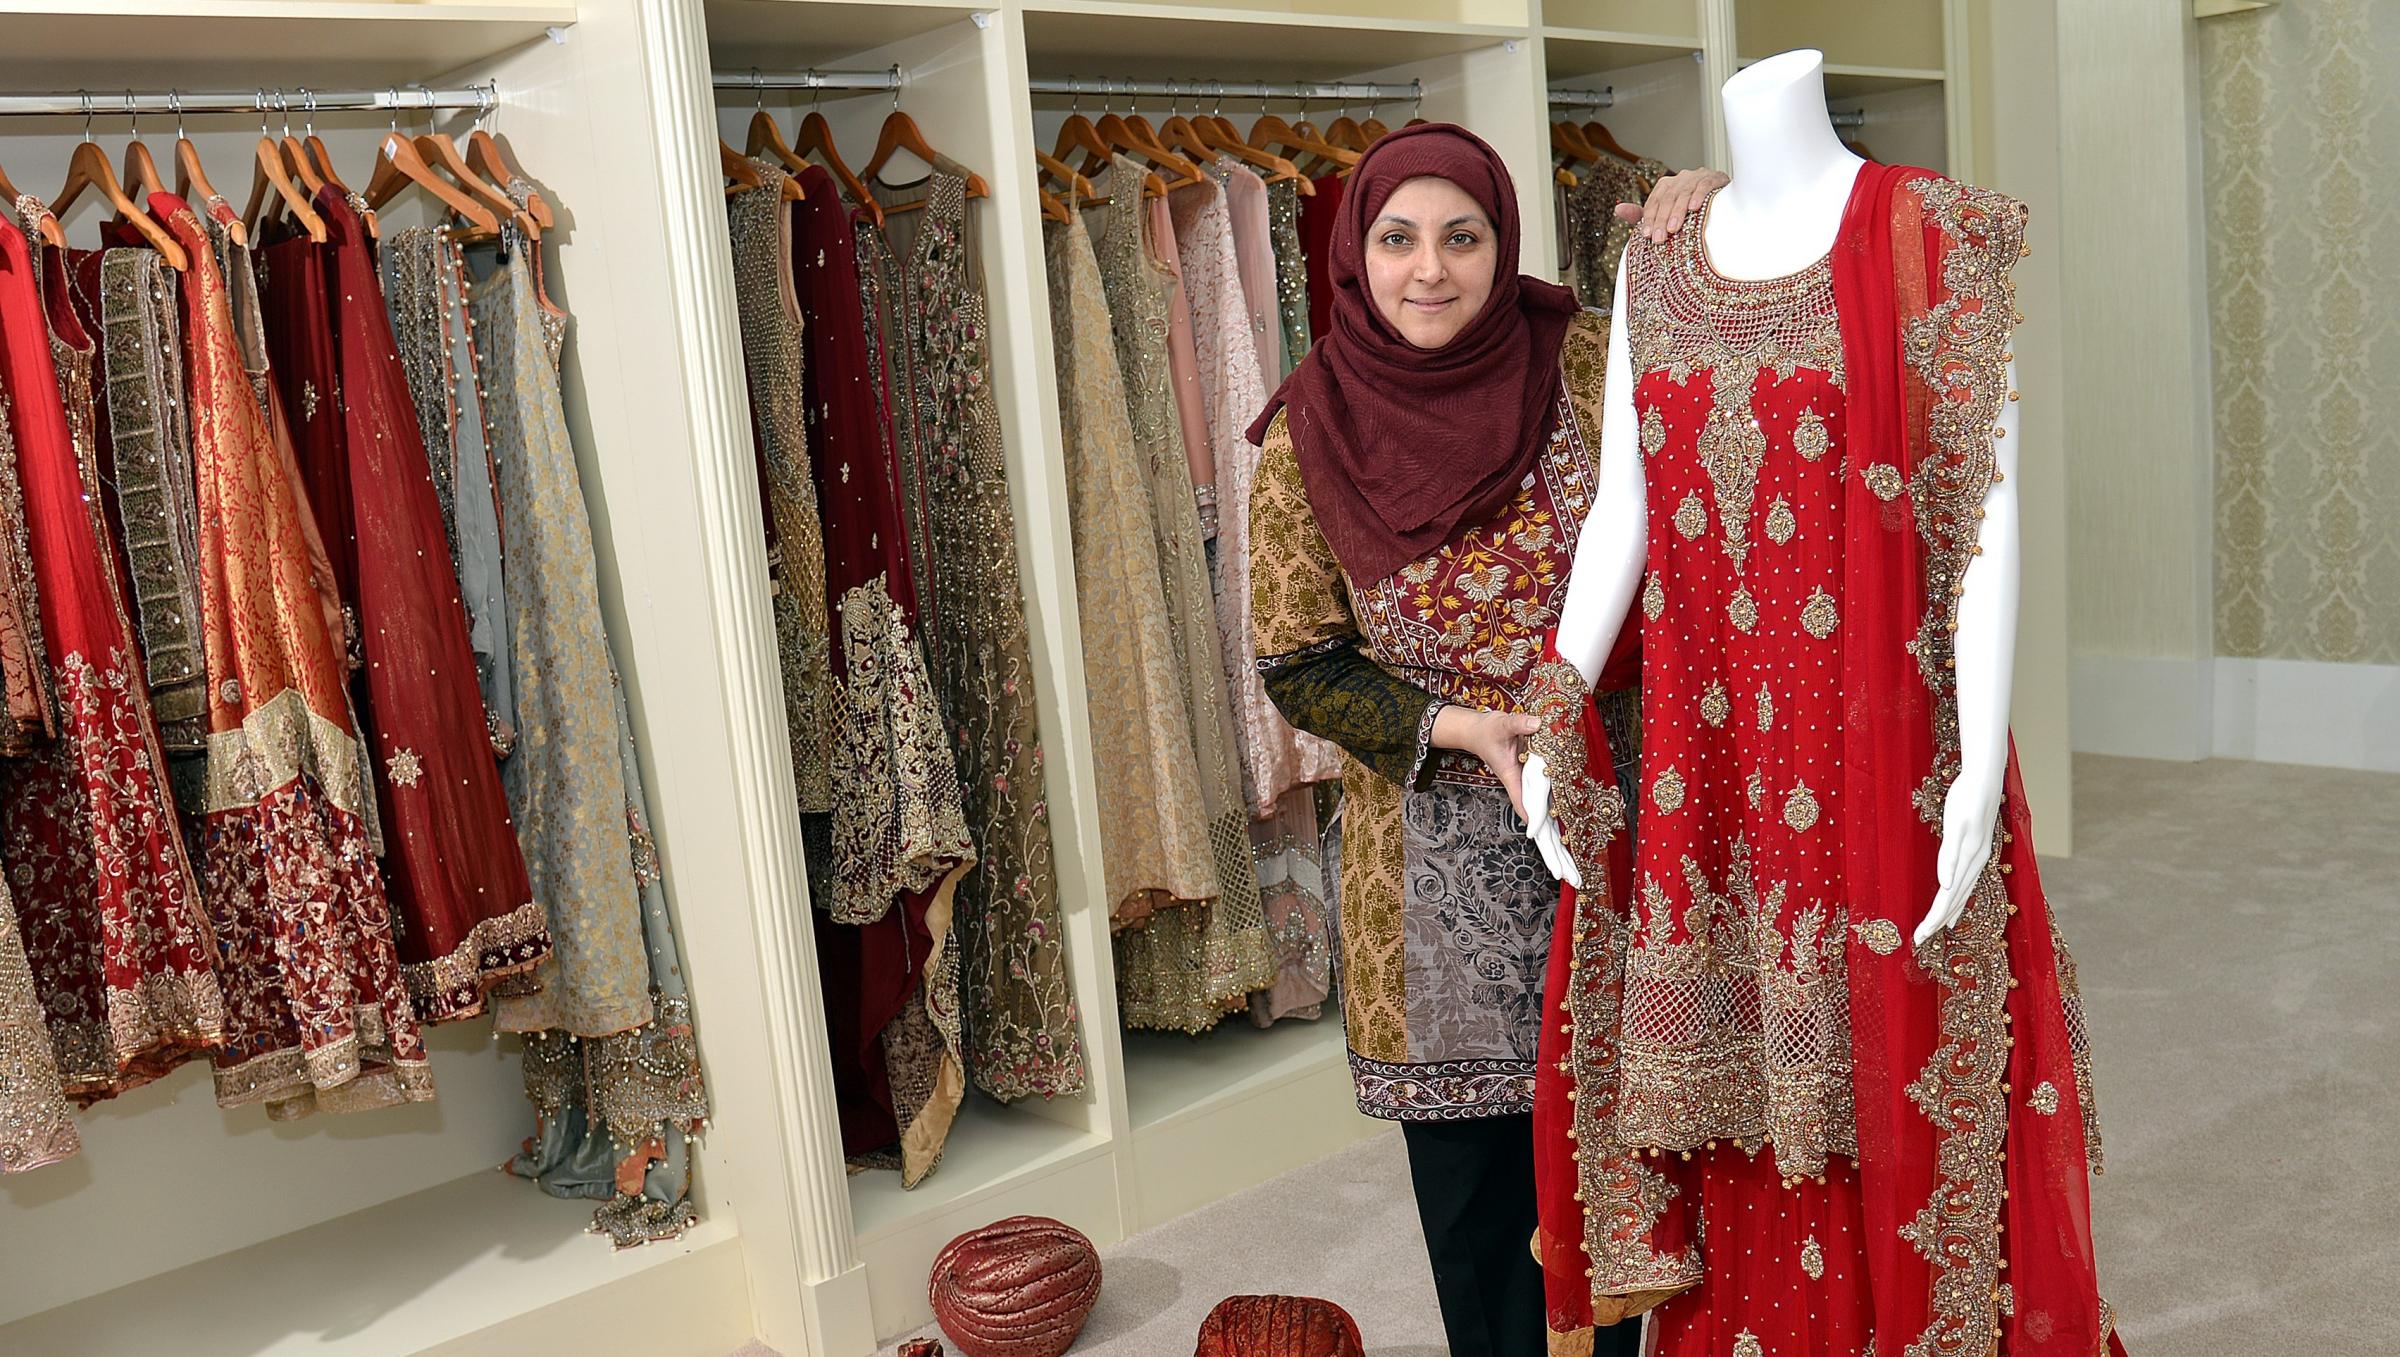 Wedding firm to open second shop